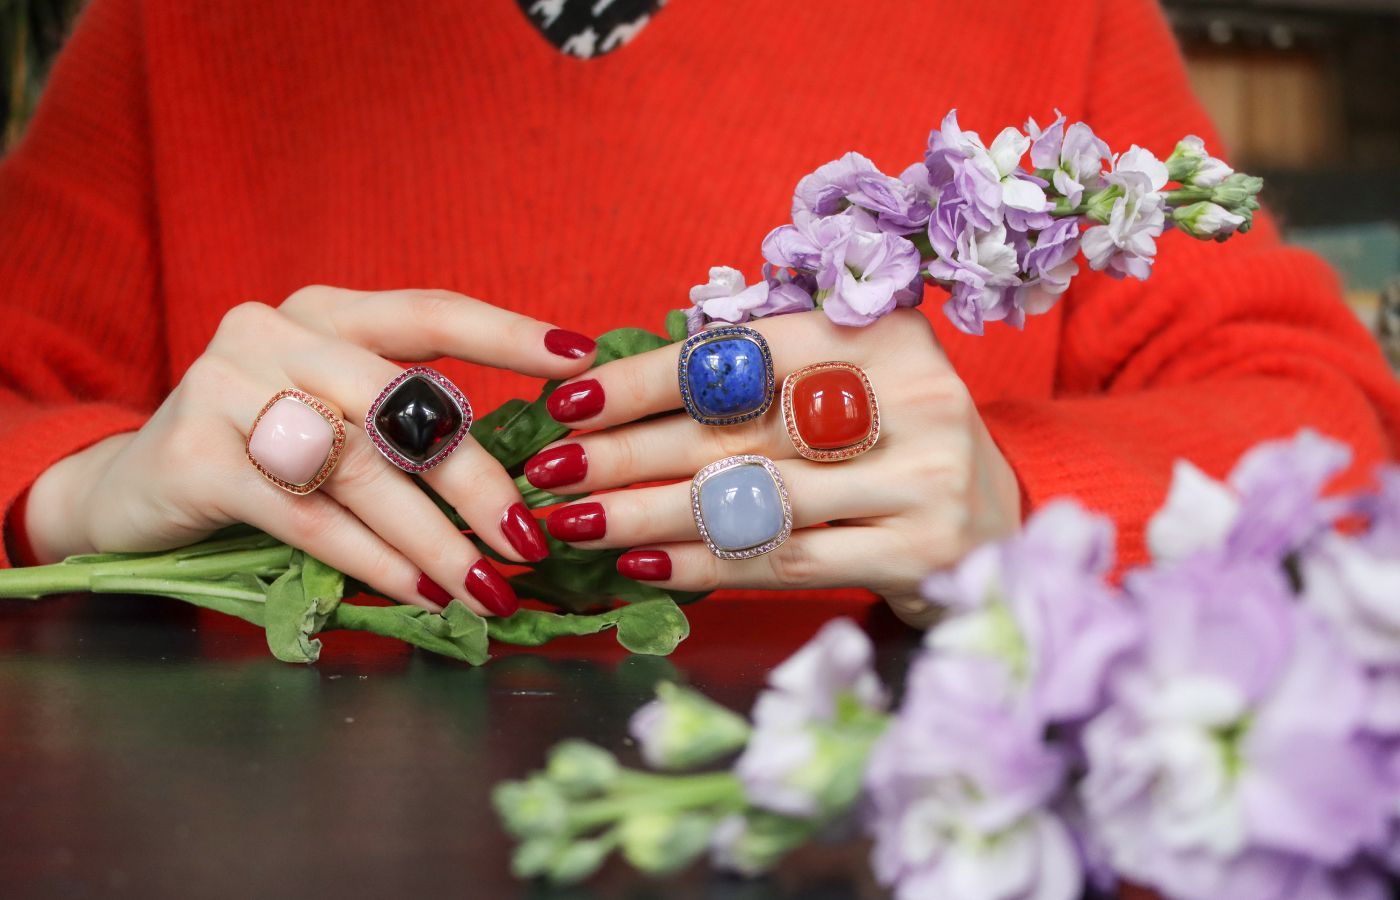 Katerina Perez wears Charlotte Reedtz Jewellery Magic Wish rings with vibrant gemstone cabochons and haloes